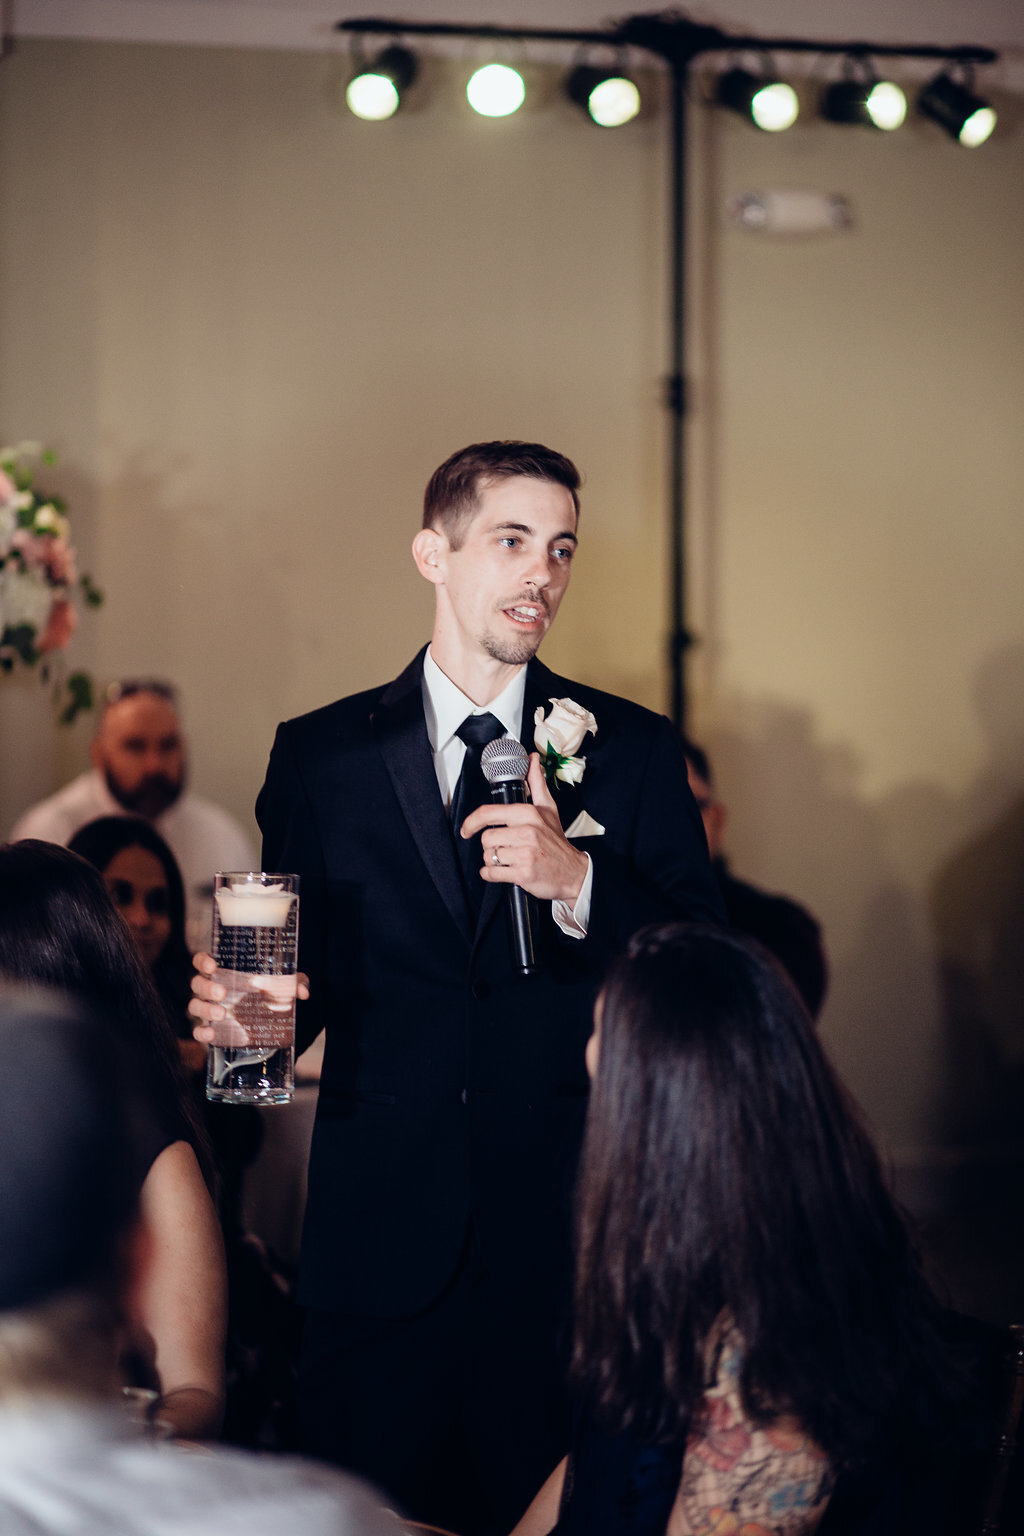 Wedding Photograph Of Groom Holding A Microphone Los Angeles